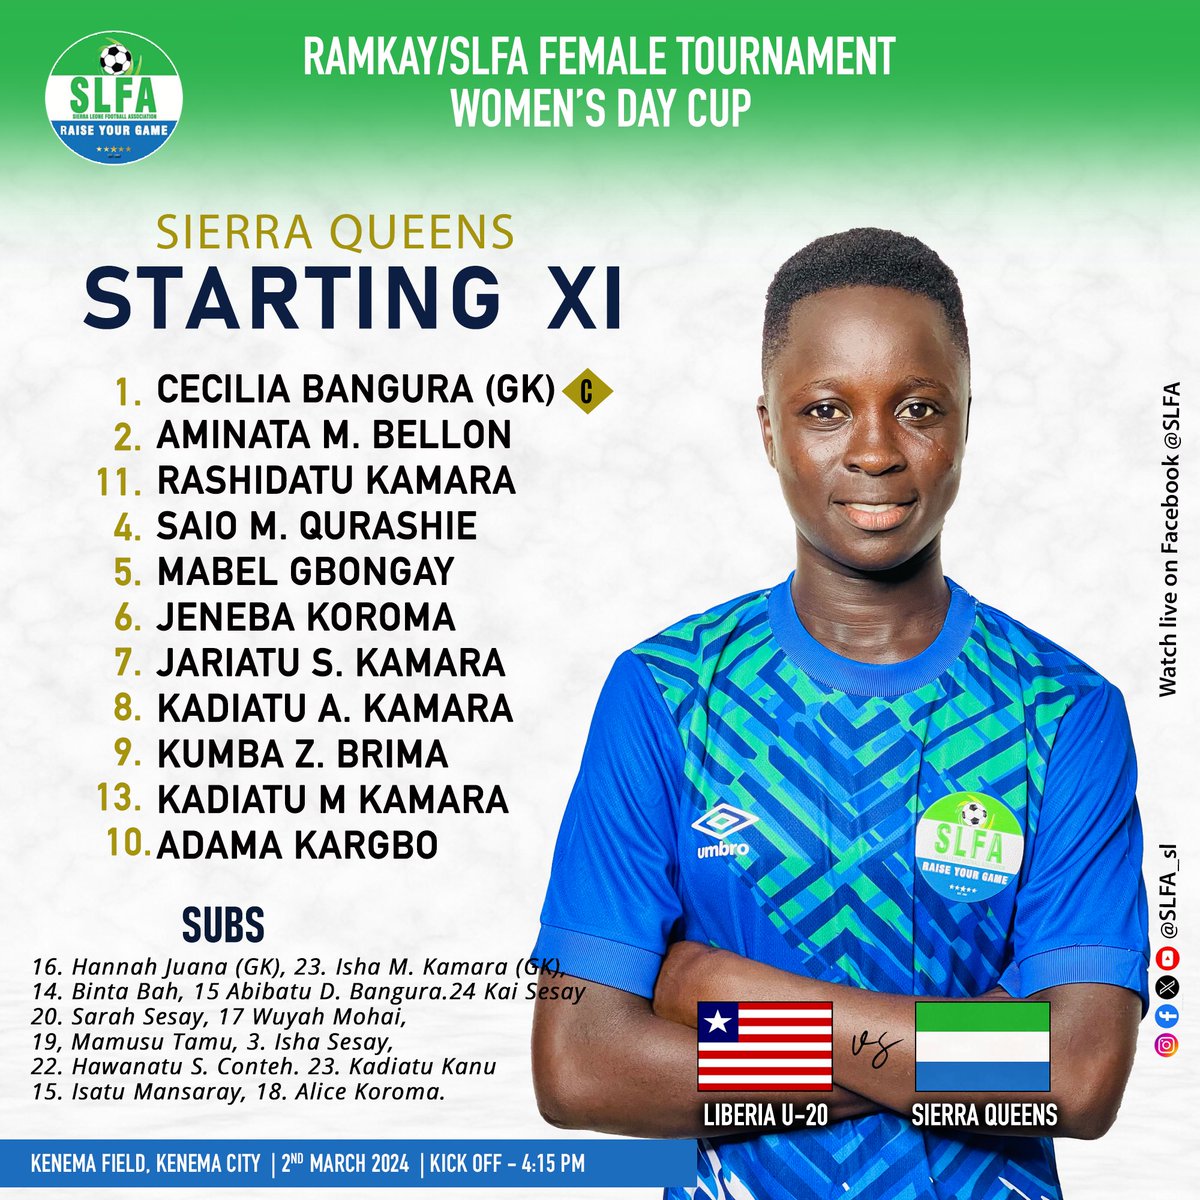 Thrilled to announce Sierra Queens' lineup for their match against Liberia U20 in the Women’s Day Cup! Stay tuned for an exciting game ahead. Go Sierra Queens! 💪⚽️ #WomensDayCup #SierraQueens